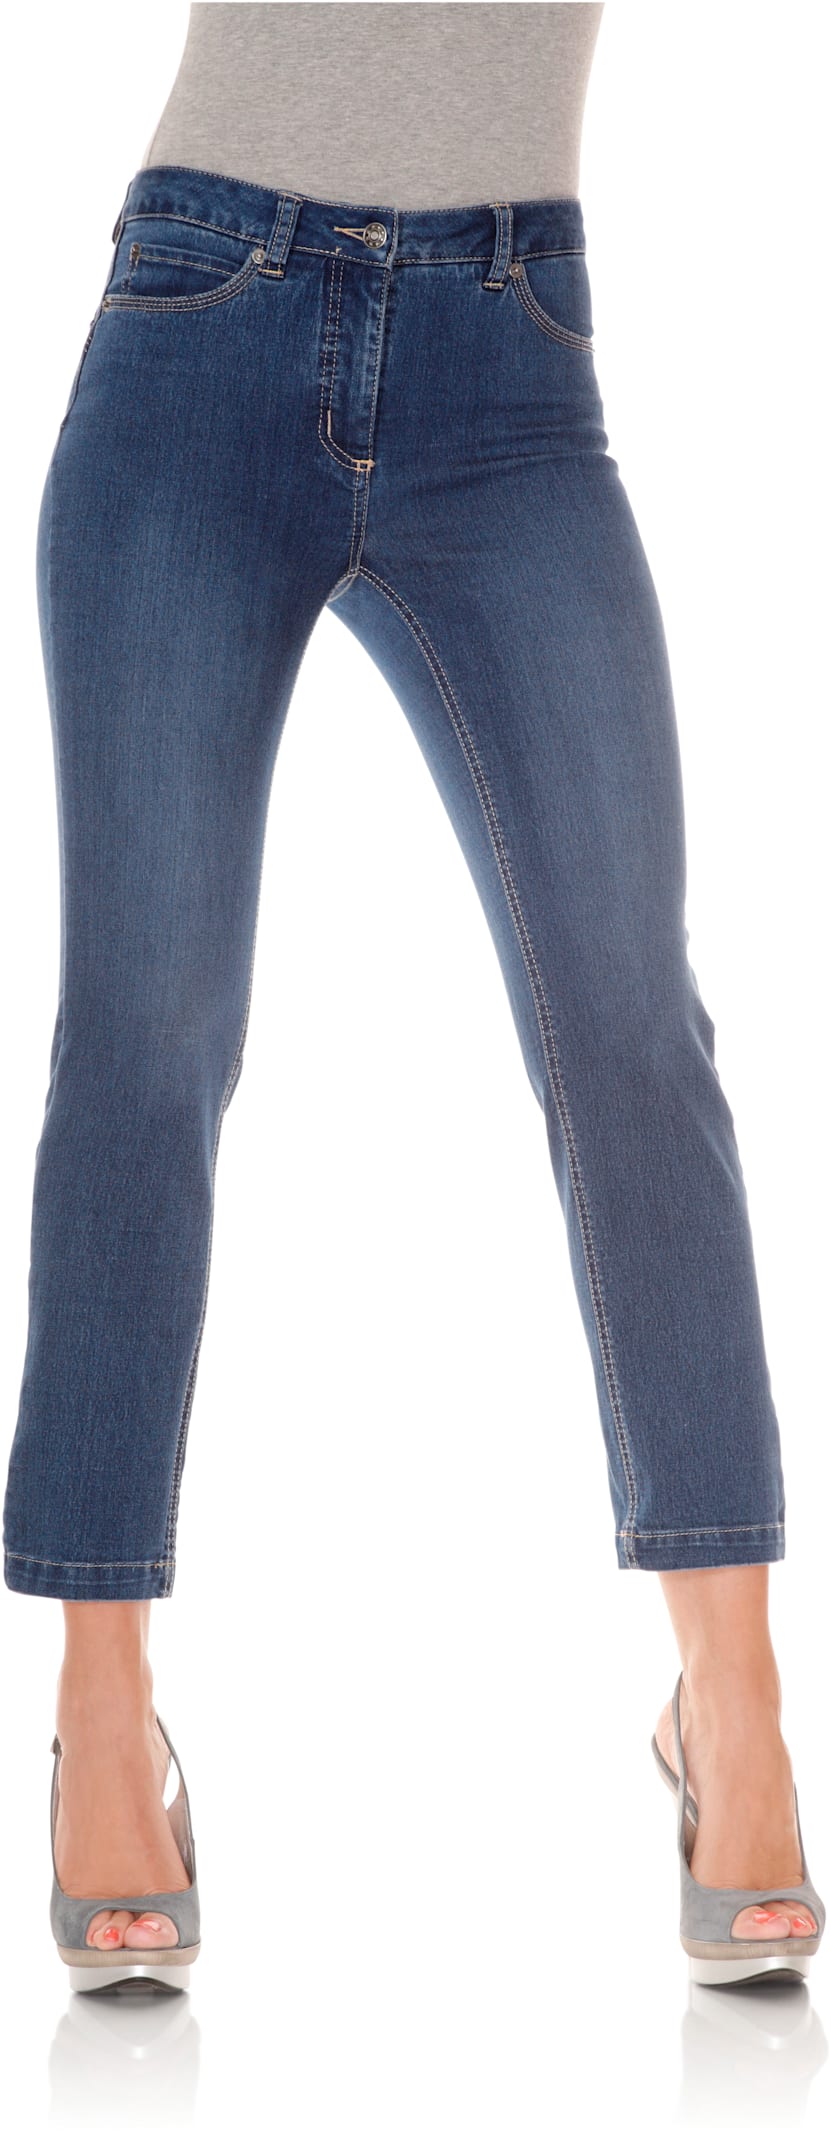 Shaping jeans - blue stone